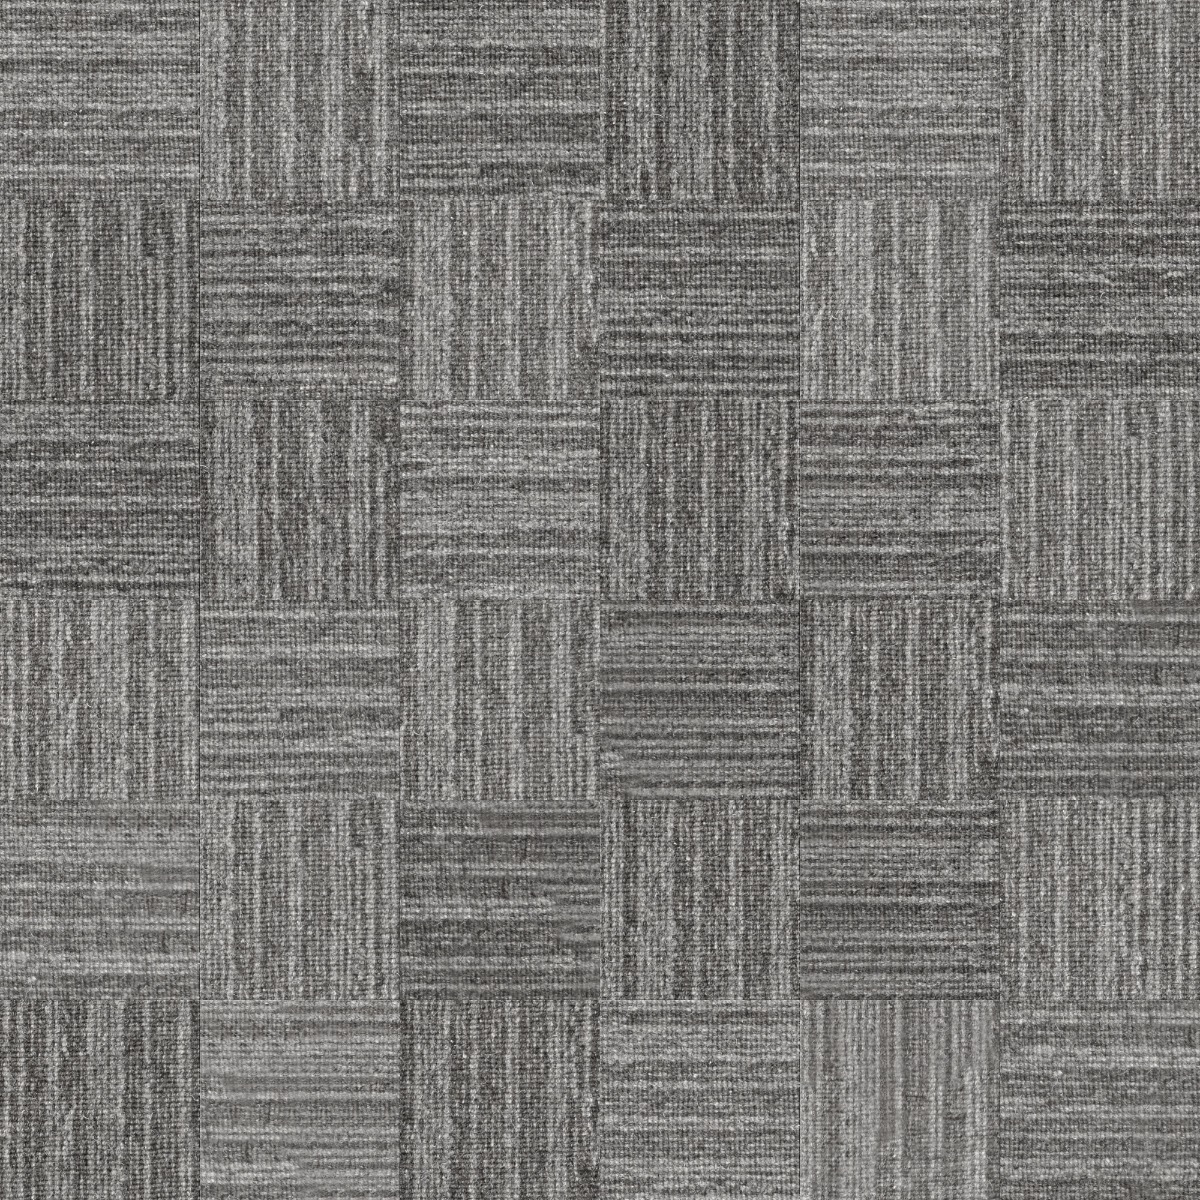 A seamless carpet texture with earth tone barcode carpet units arranged in a Stack pattern